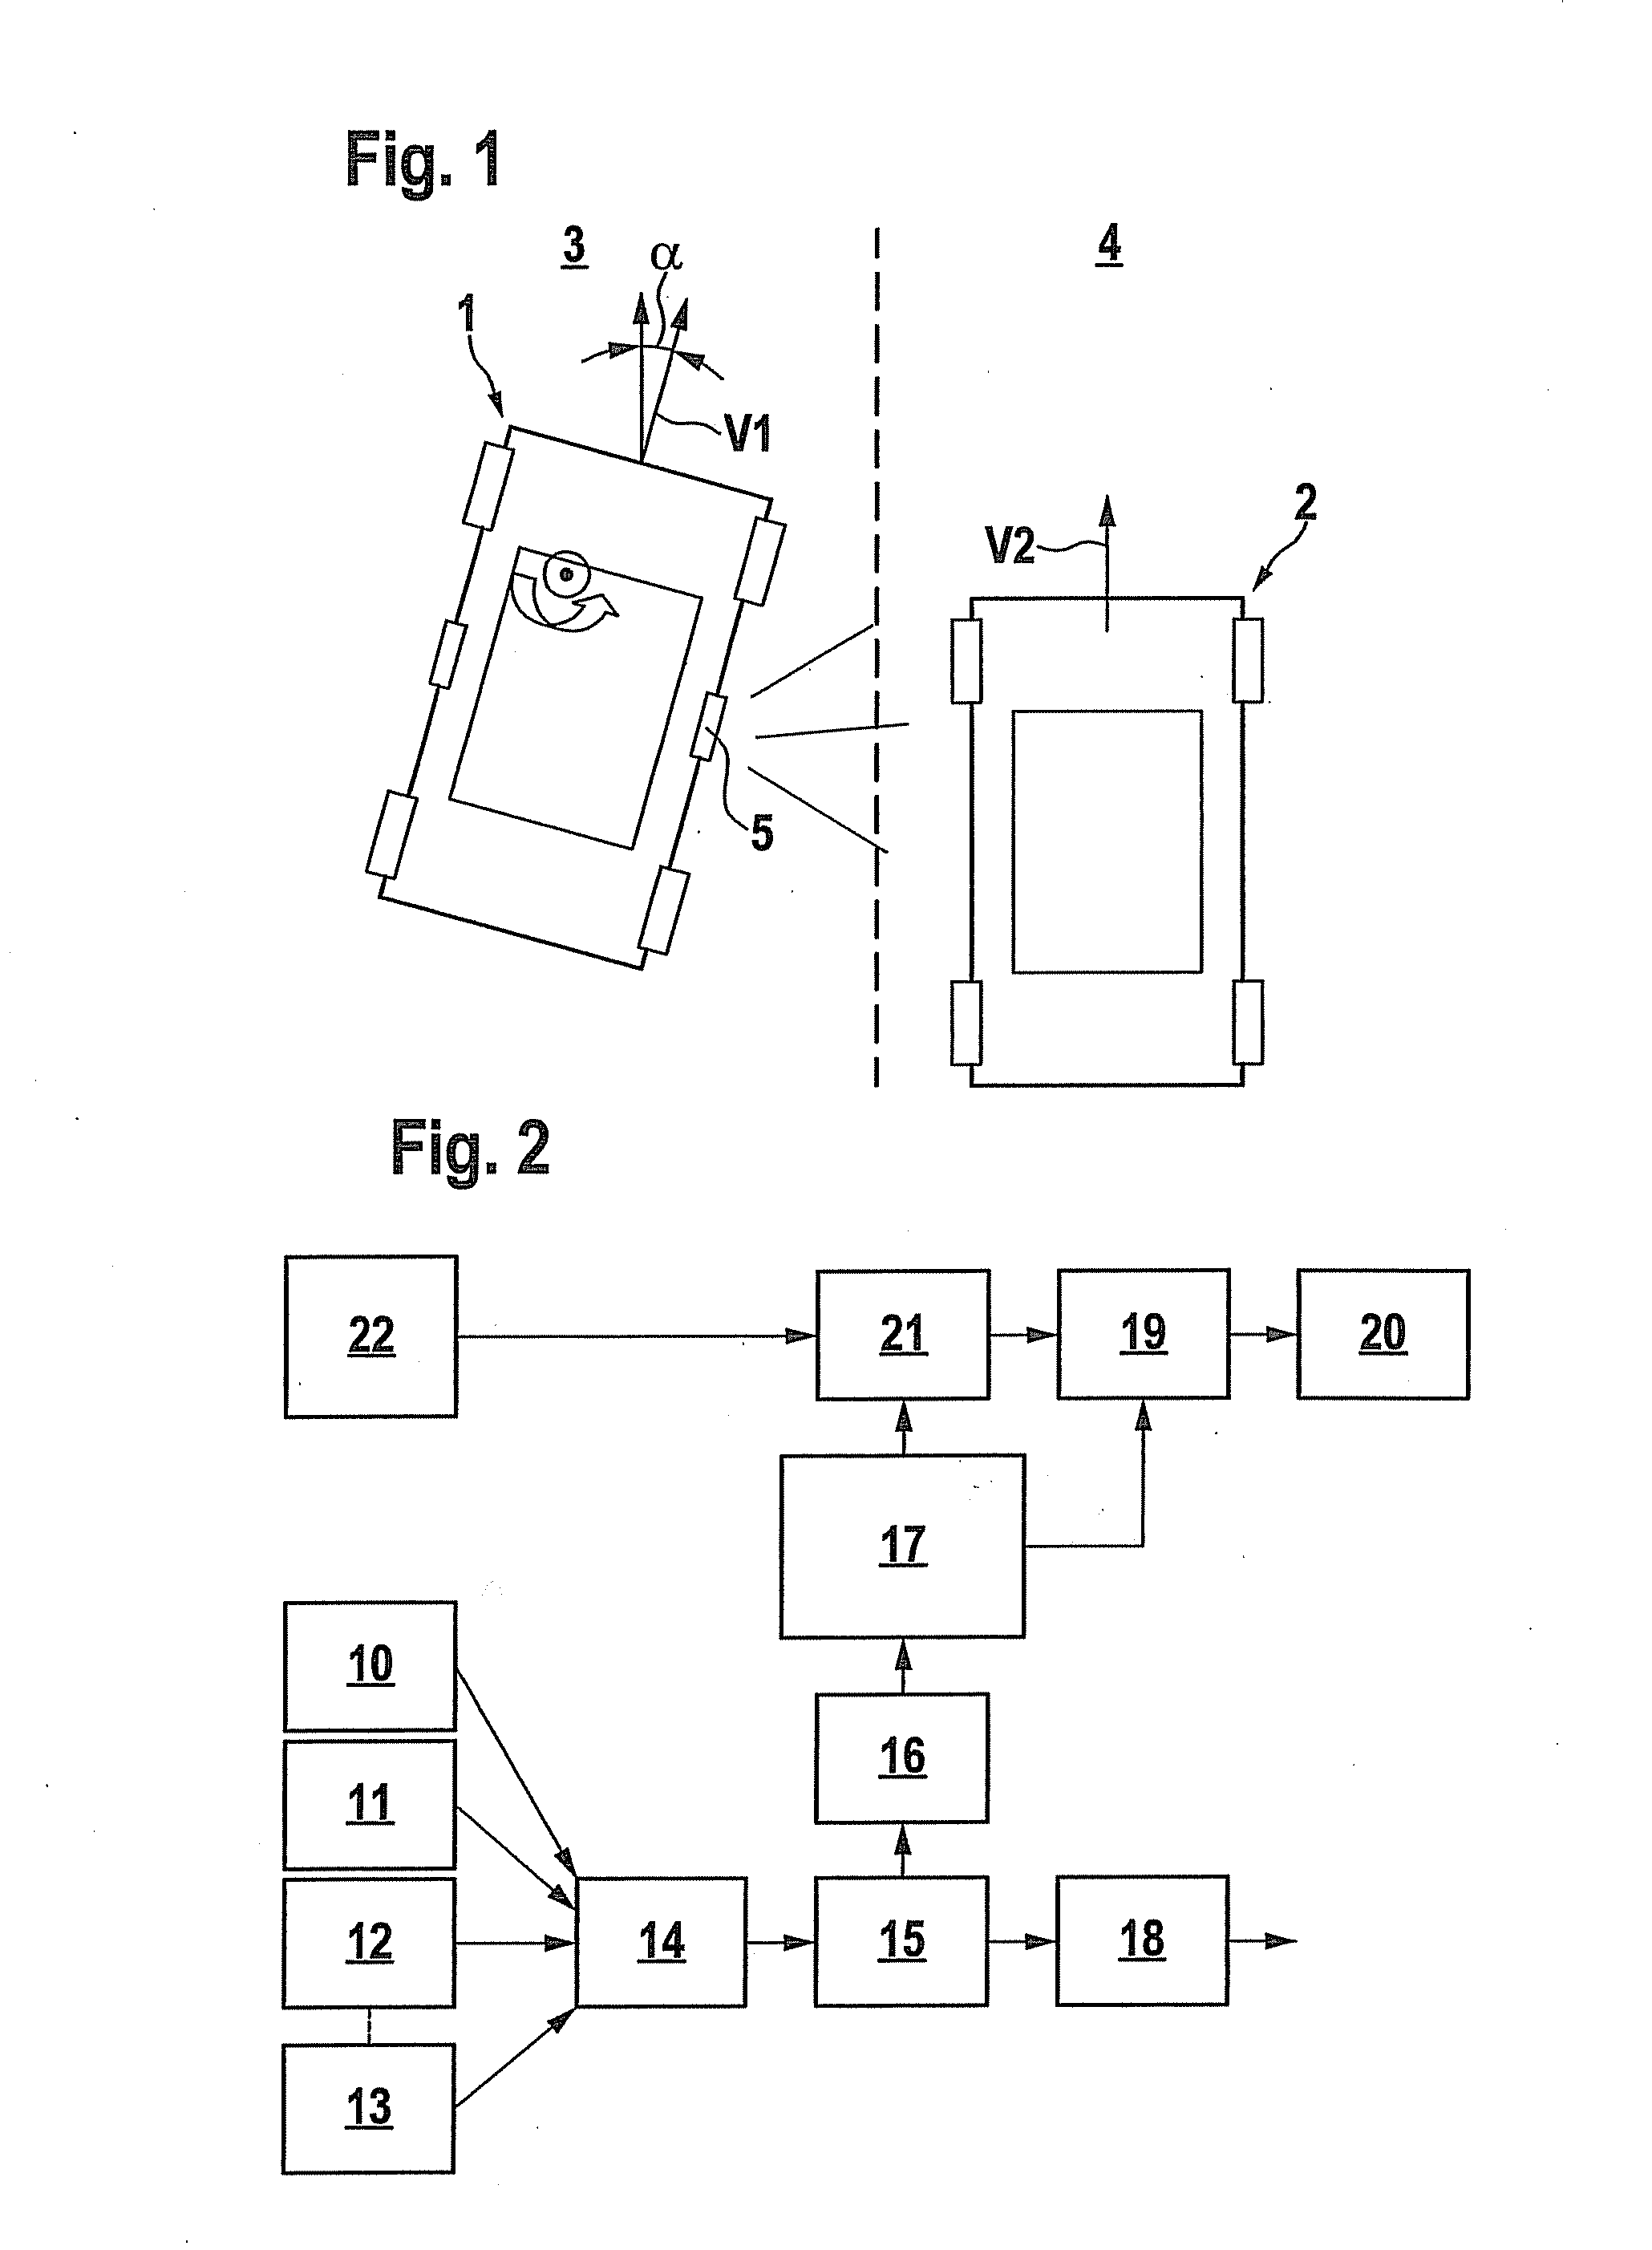 Method for setting an actuator that influences the driving dynamics of a vehicle